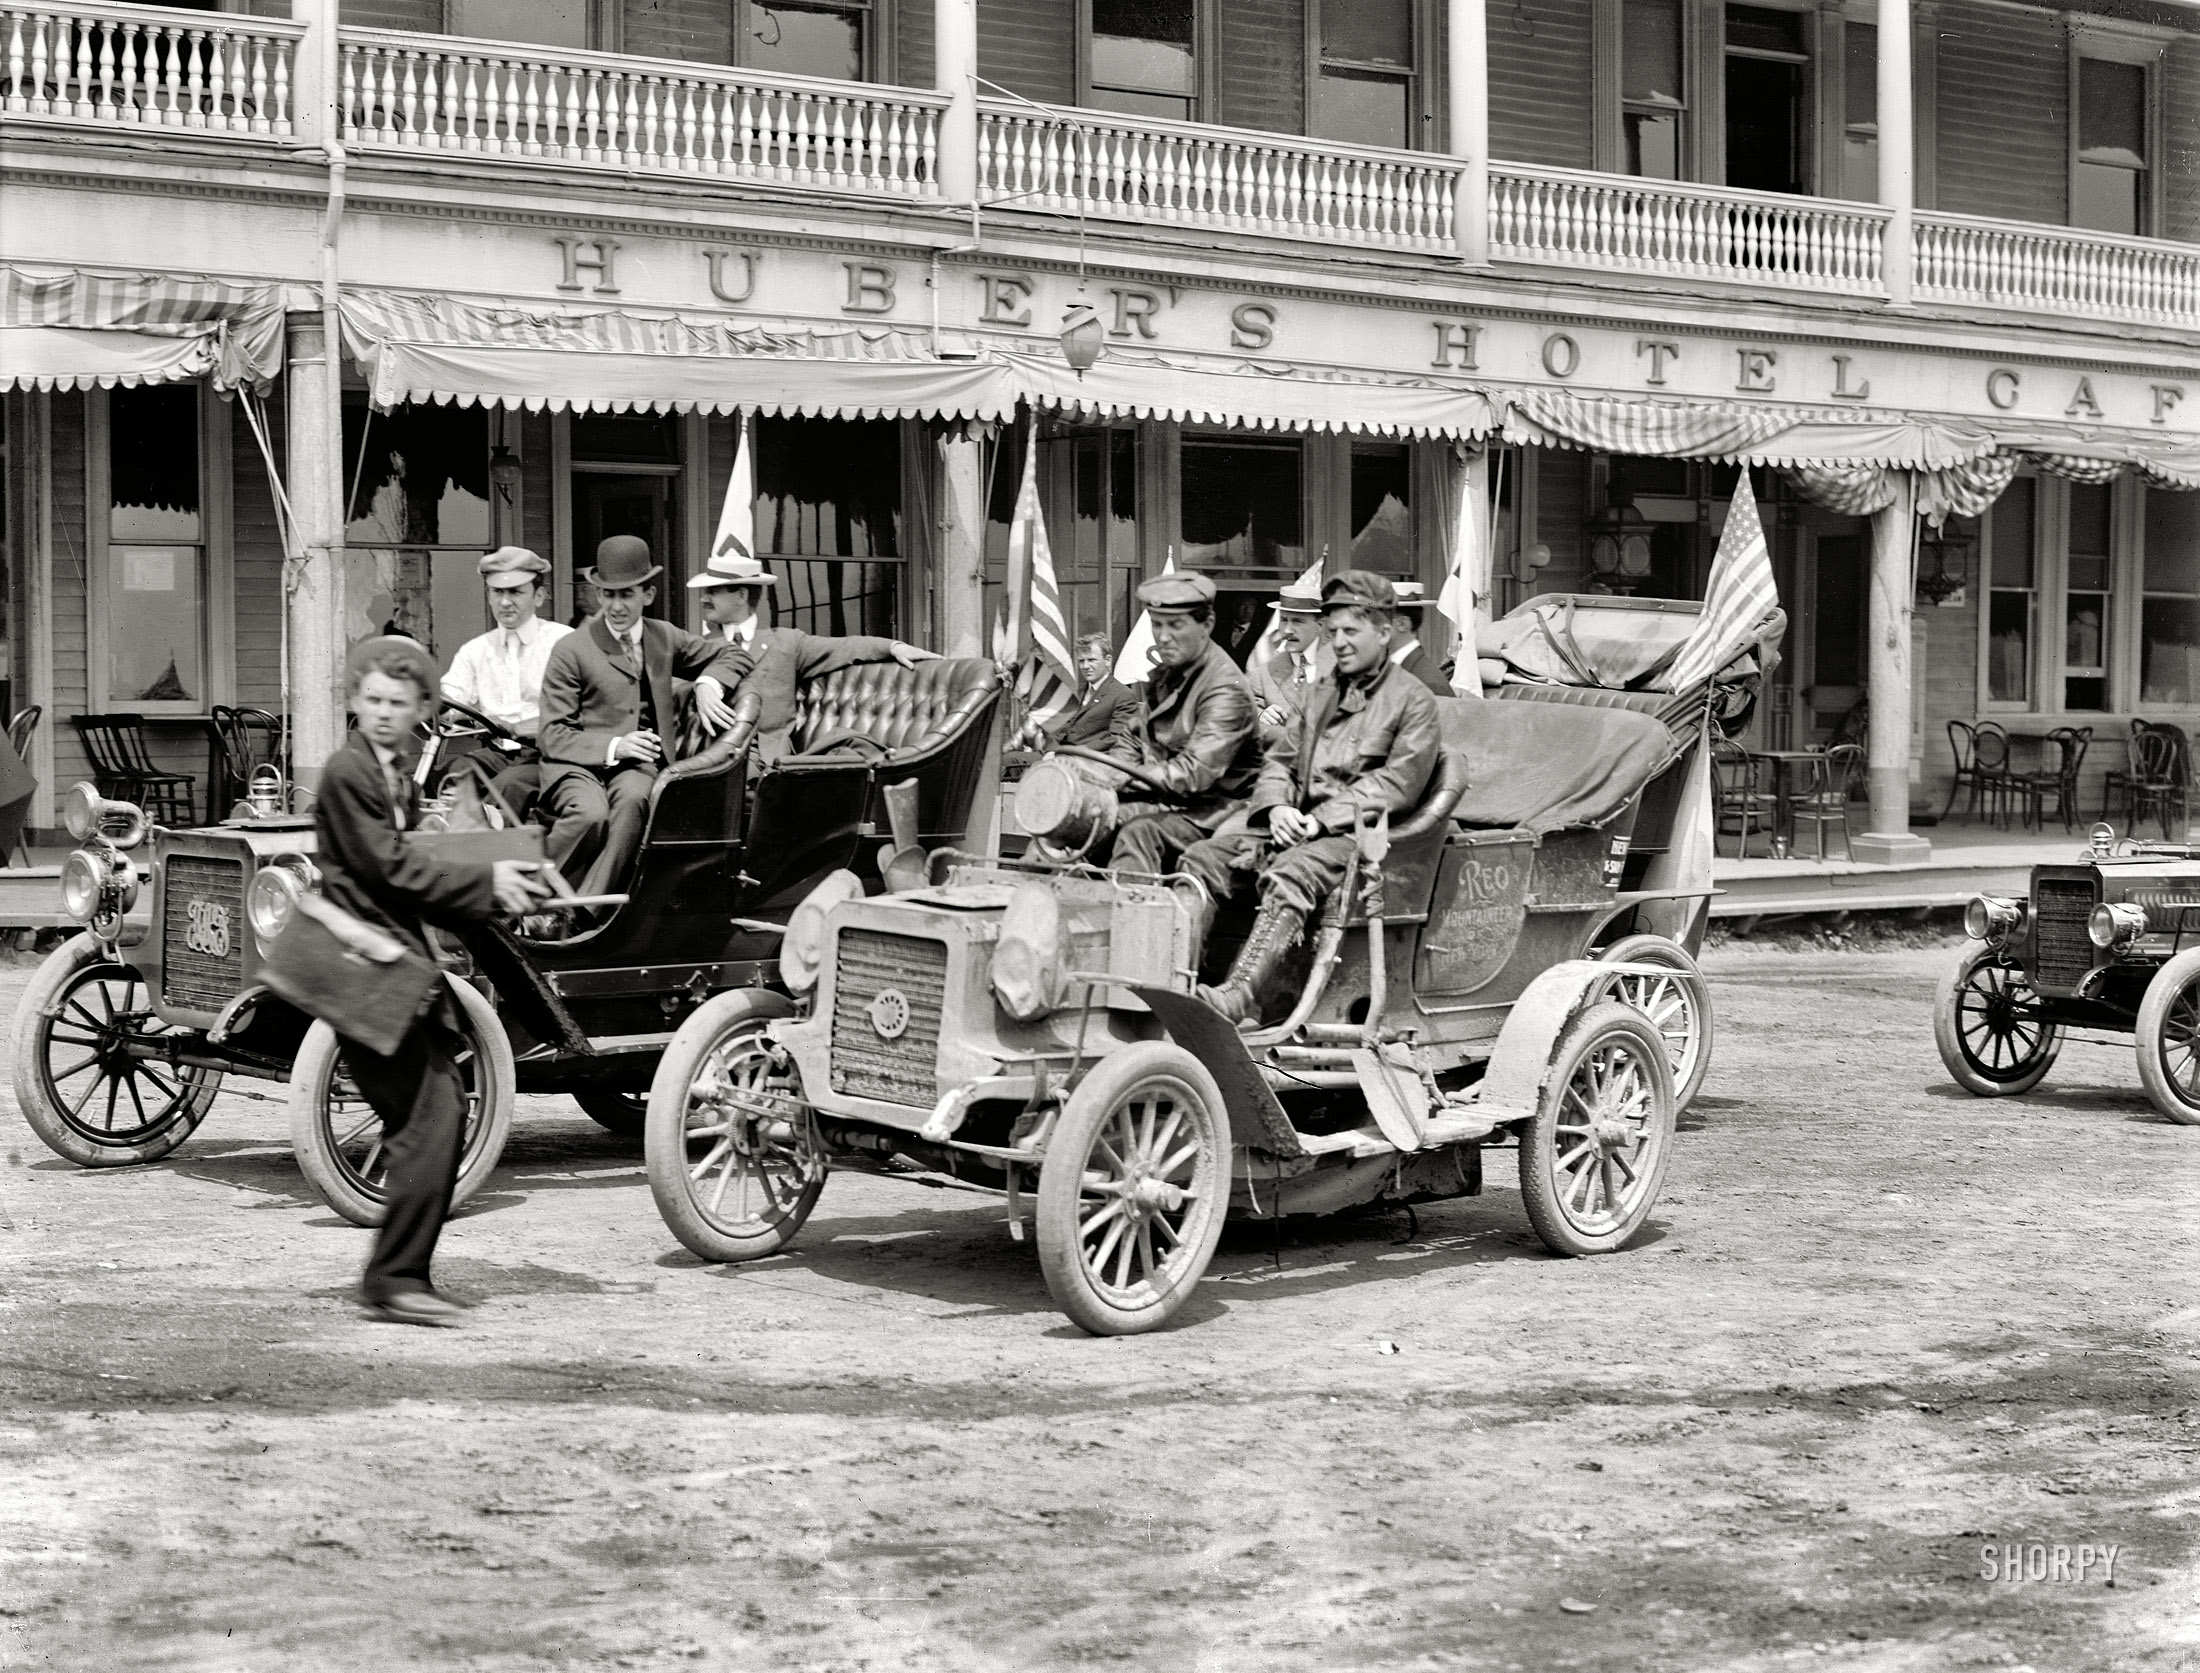 New York, June 1906. "REO Mountaineer, New York to San Francisco and back." Percy Megargel and David Fassett pass Huber's Hotel on 162nd Street in the Bronx at the end of their 10-month, 11,000-mile trip in a 16-horsepower touring car. Note the unpaved street at the present-day location of Yankee Stadium. 8x10 inch dry plate glass negative, Detroit Publishing Company. View full size.